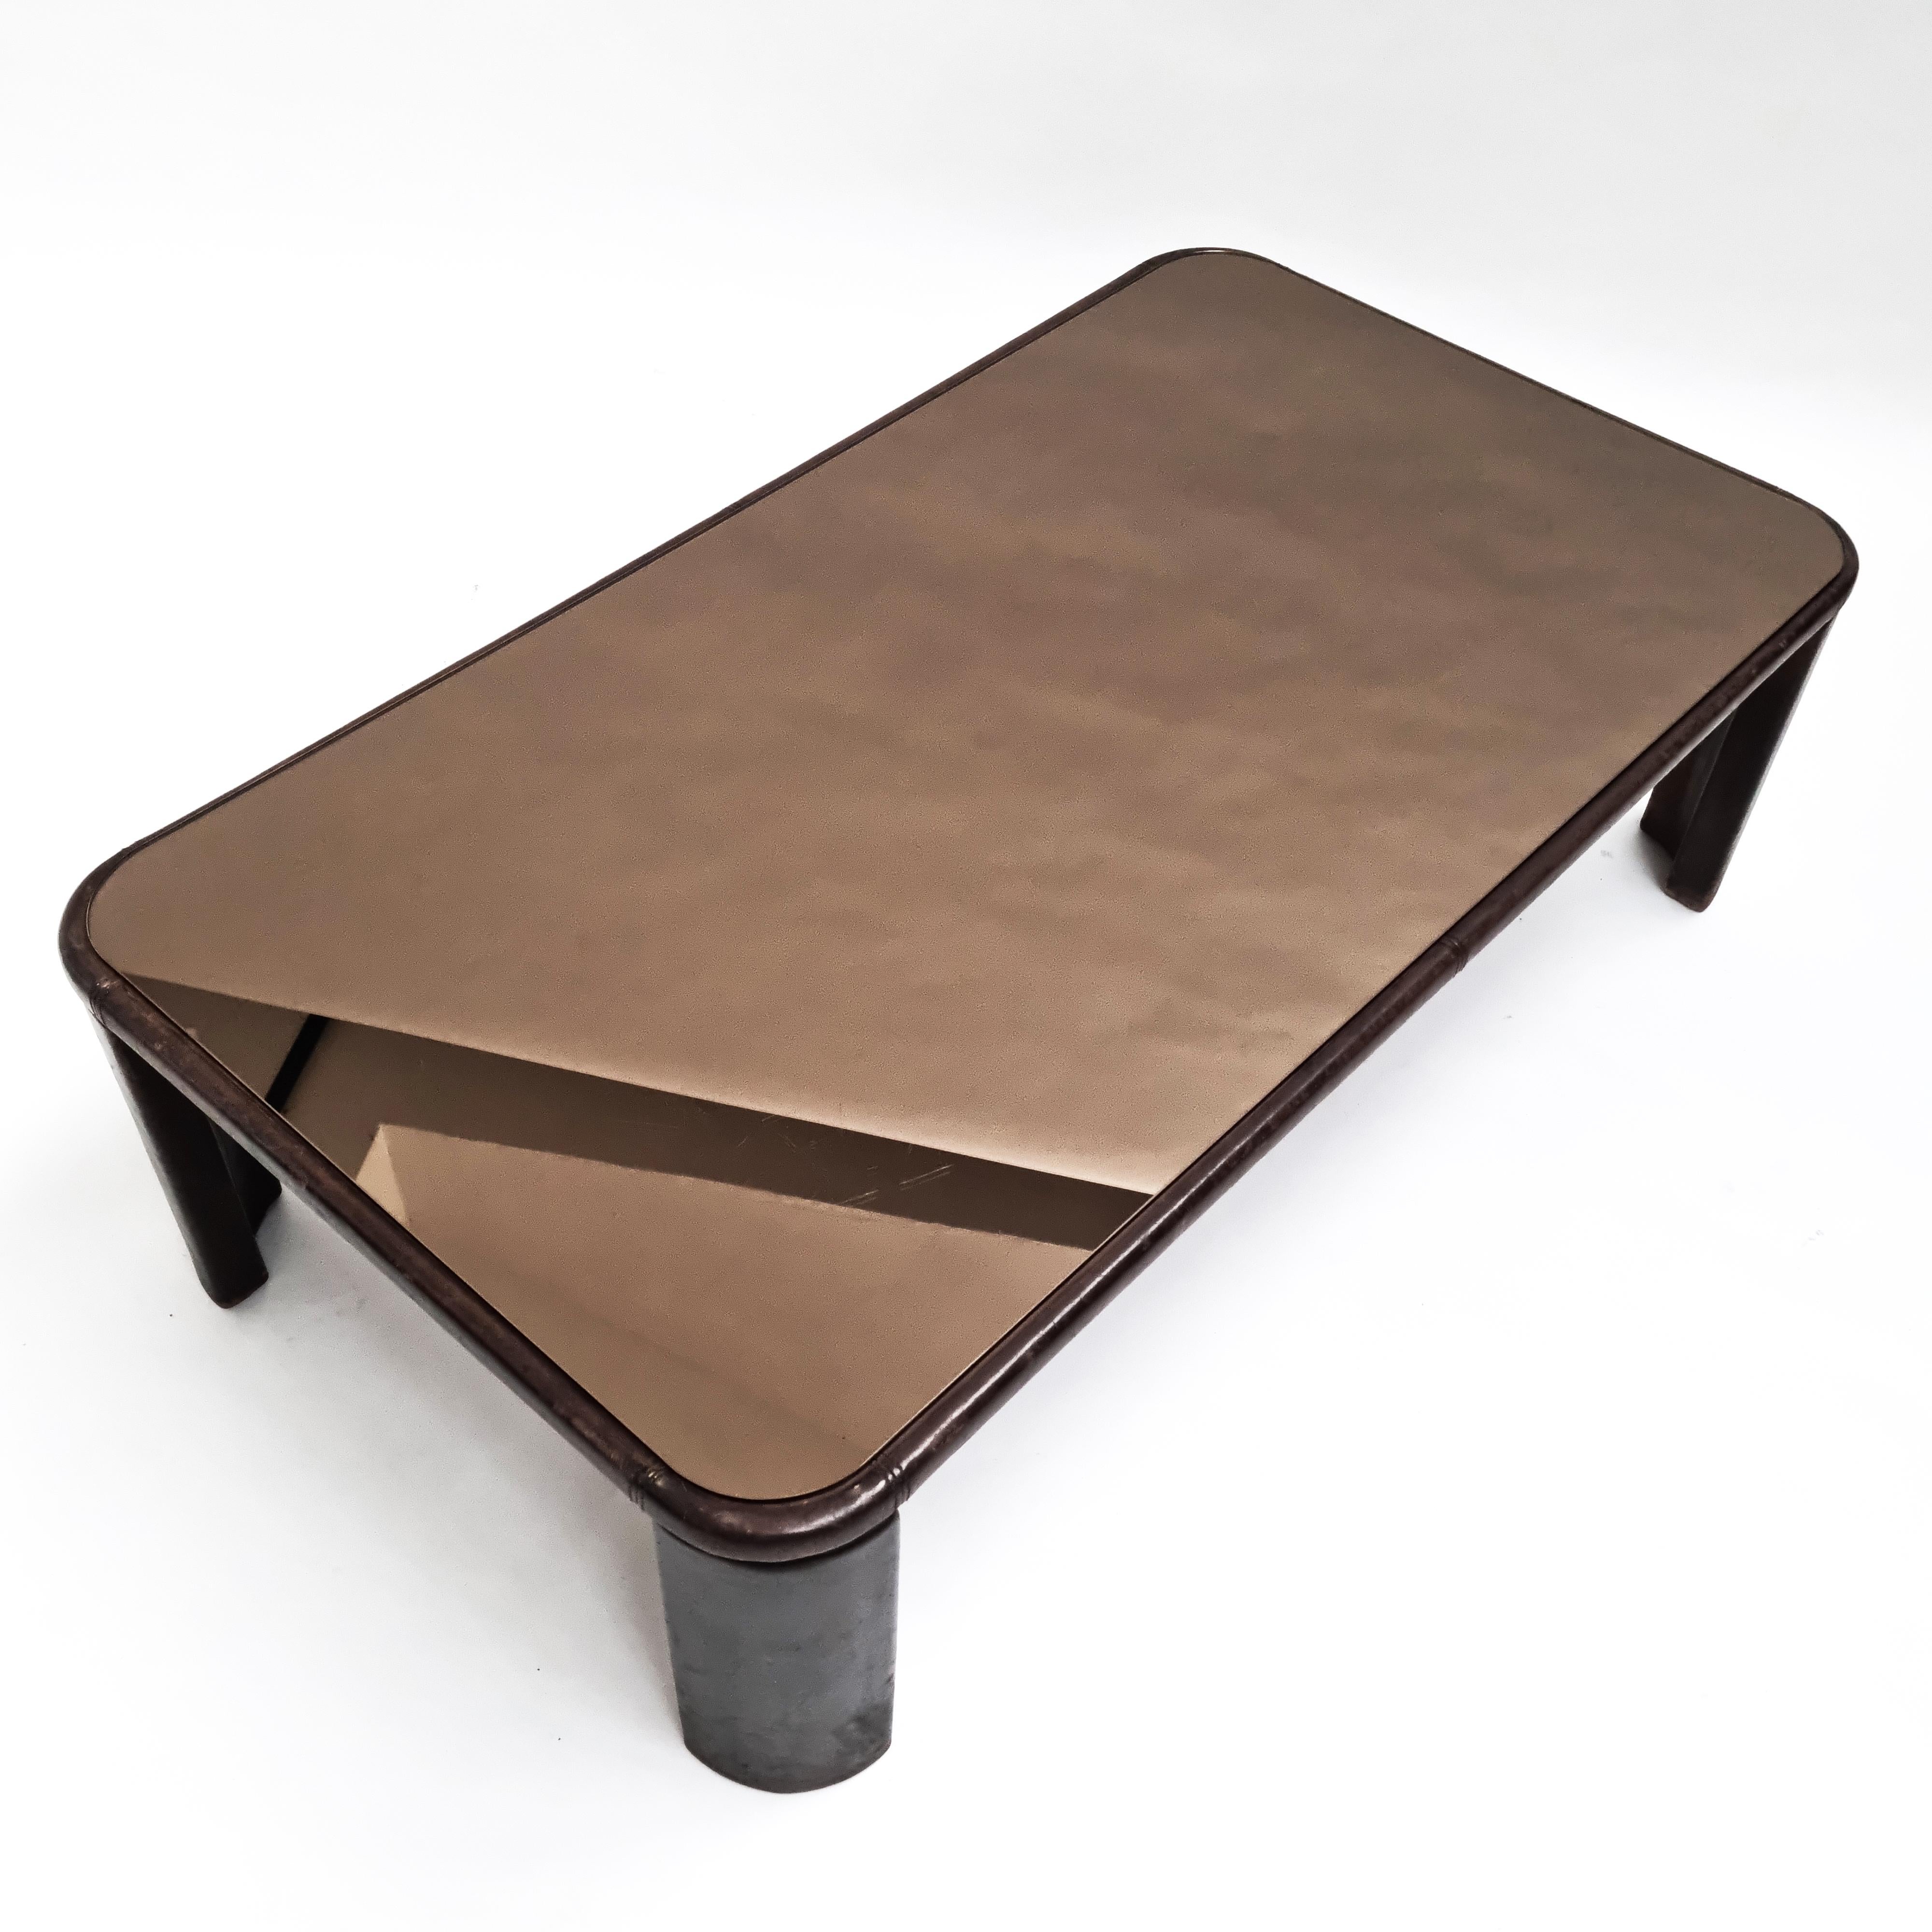 Late 20th Century De Sede Leather Coffee Table, Switzerland, 1970s For Sale